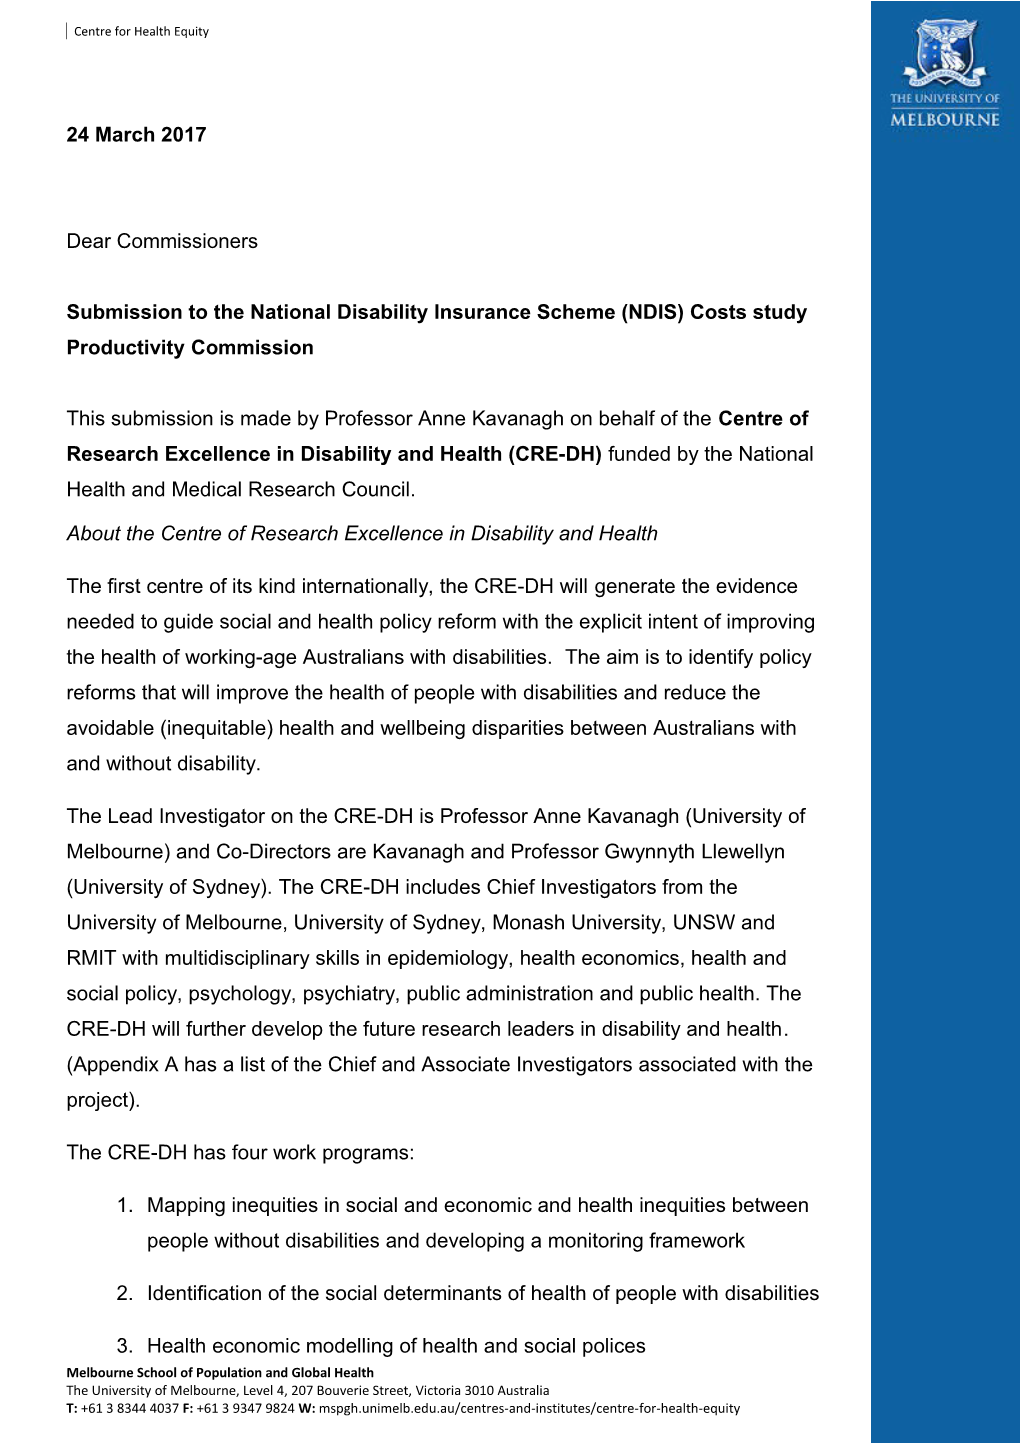 Submission 69 - Centre of Research Excellence in Disability and Health - National Disability